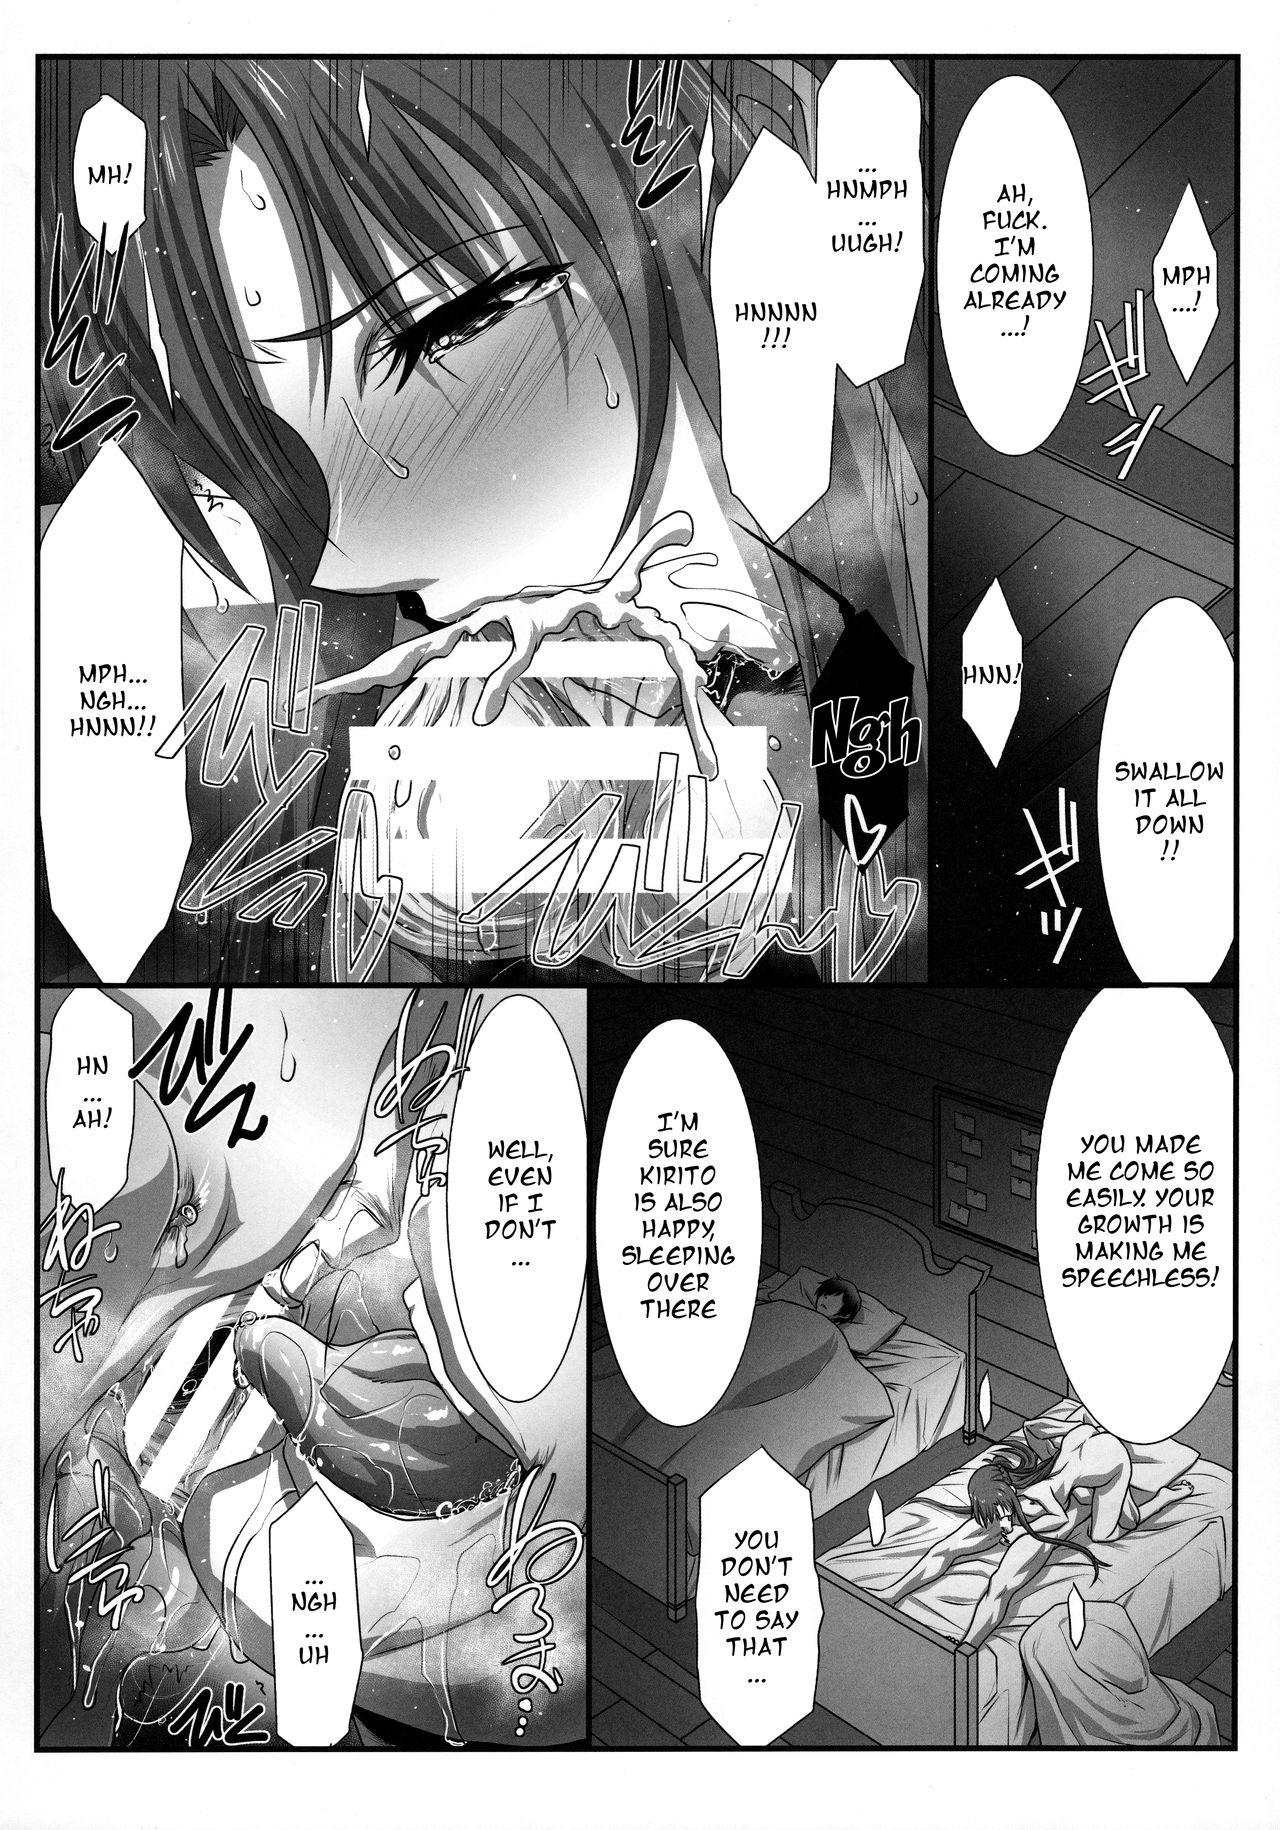 Amature Astral Bout Ver. 42 - Sword art online Curves - Page 6